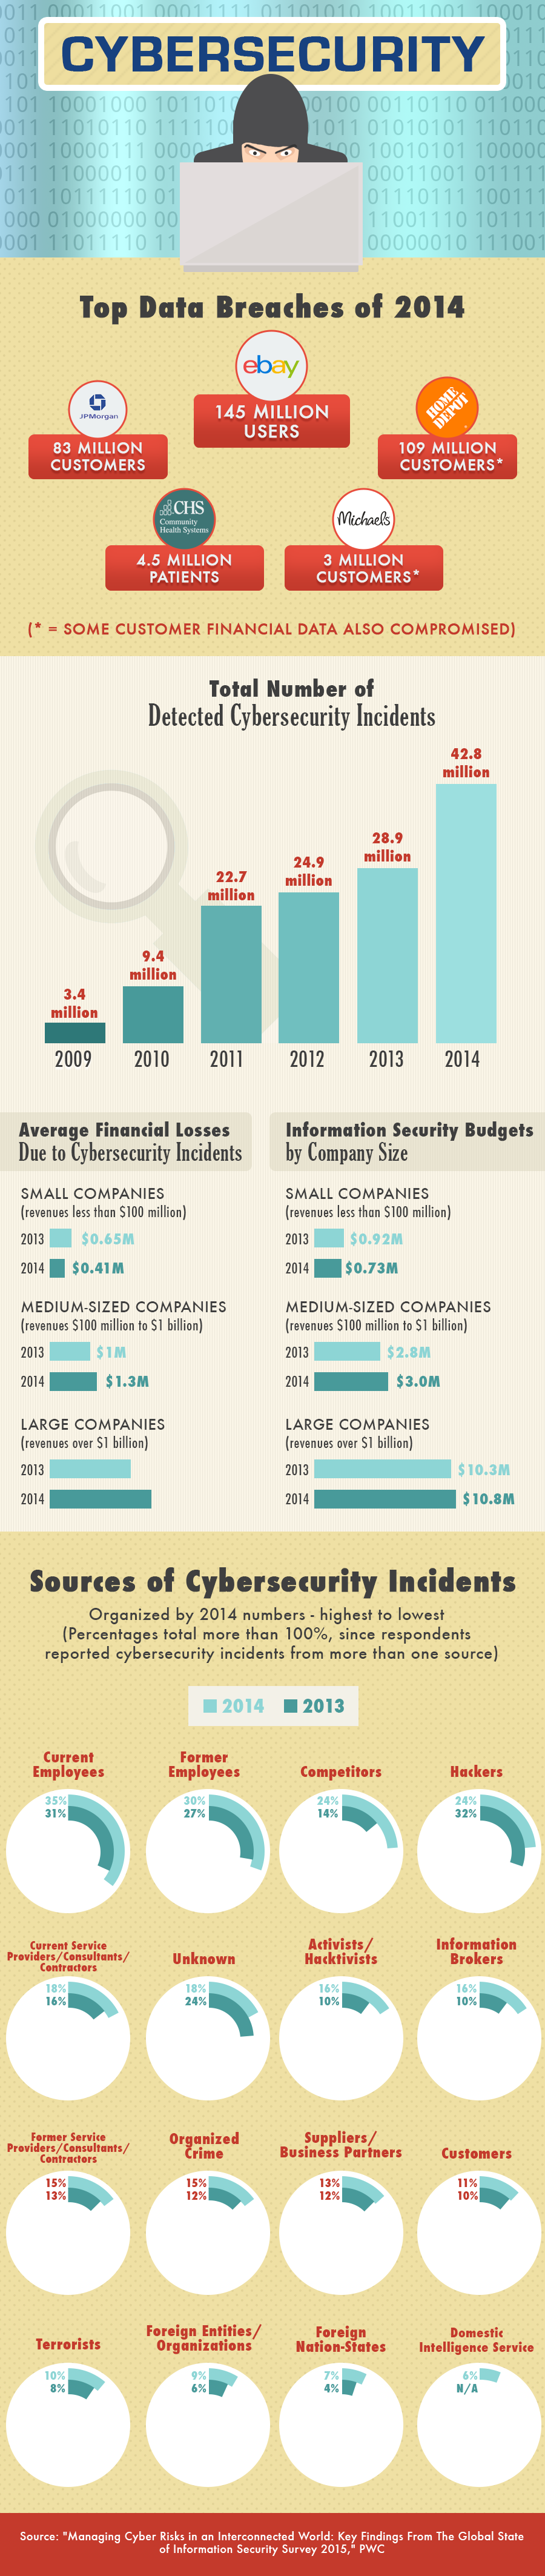 Infographic: Top Data Breaches of 2014